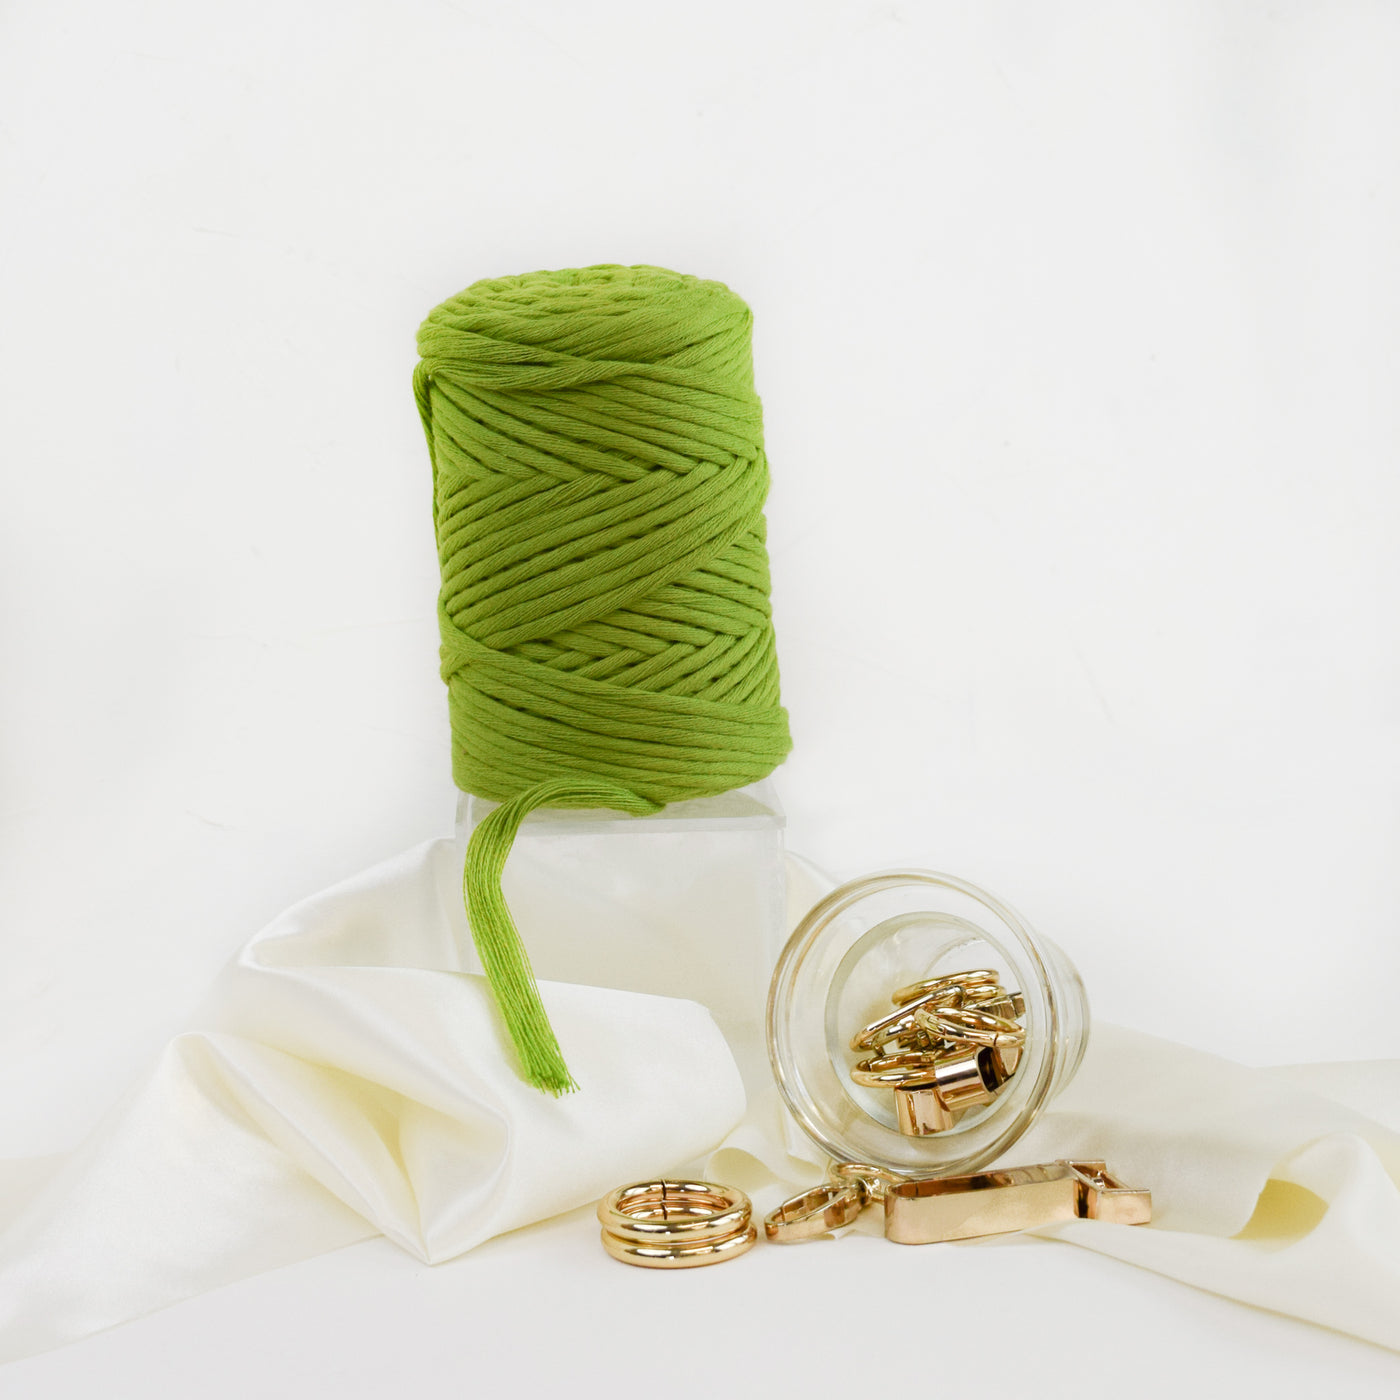 COTTON - VISCOSE ROLL 4 MM - APPLE GREEN COLOR | LIMITED EDITION